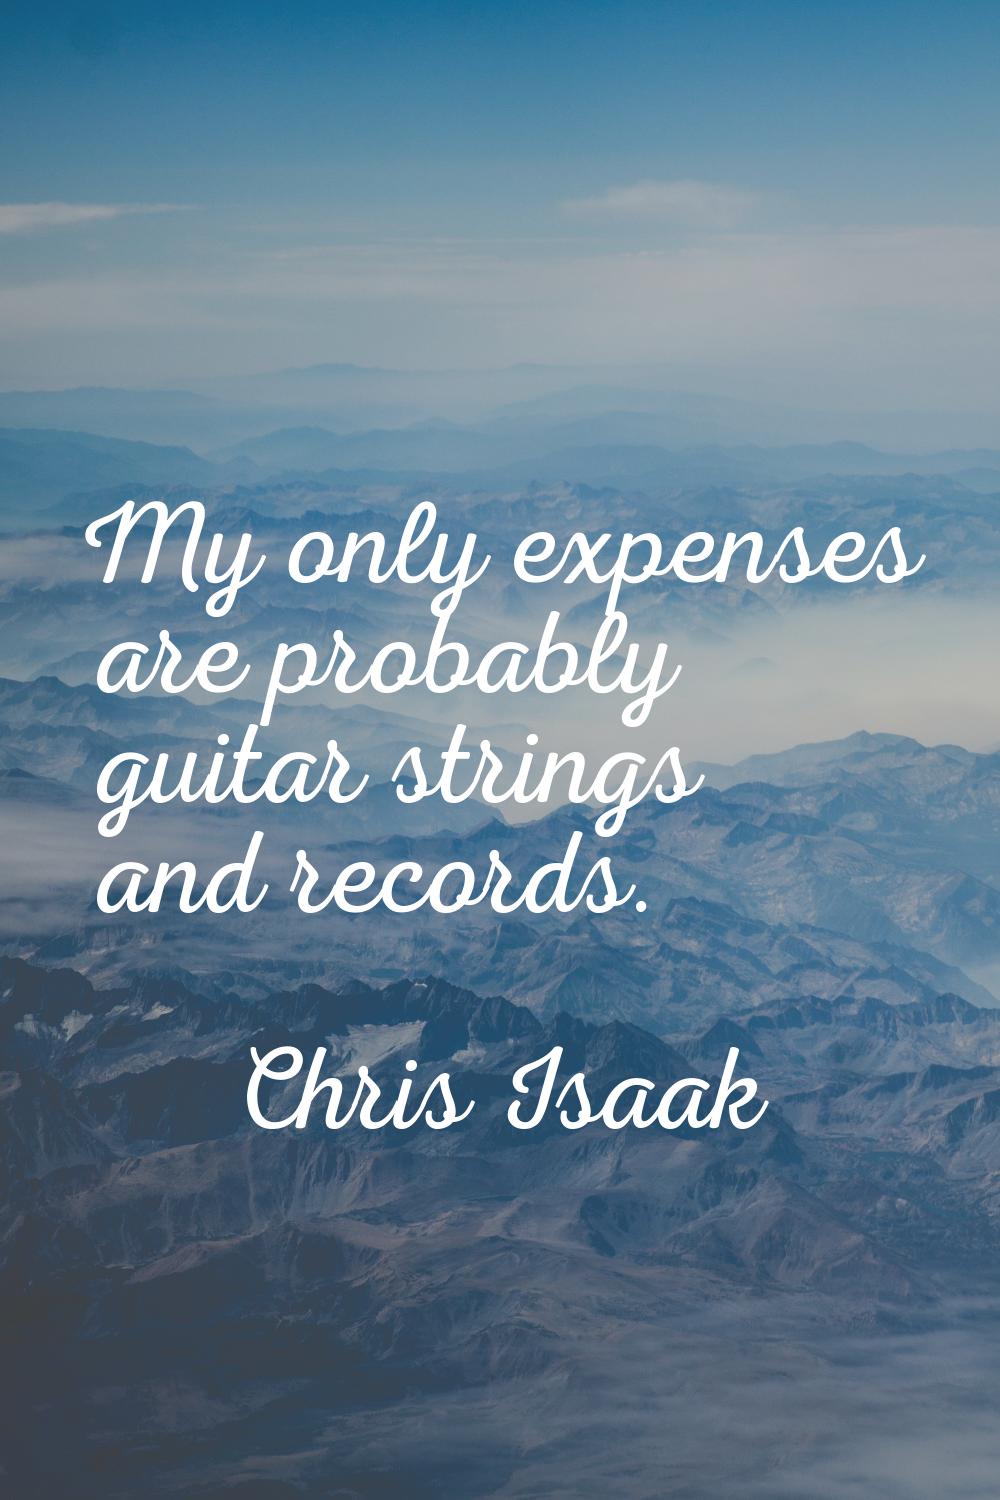 My only expenses are probably guitar strings and records.